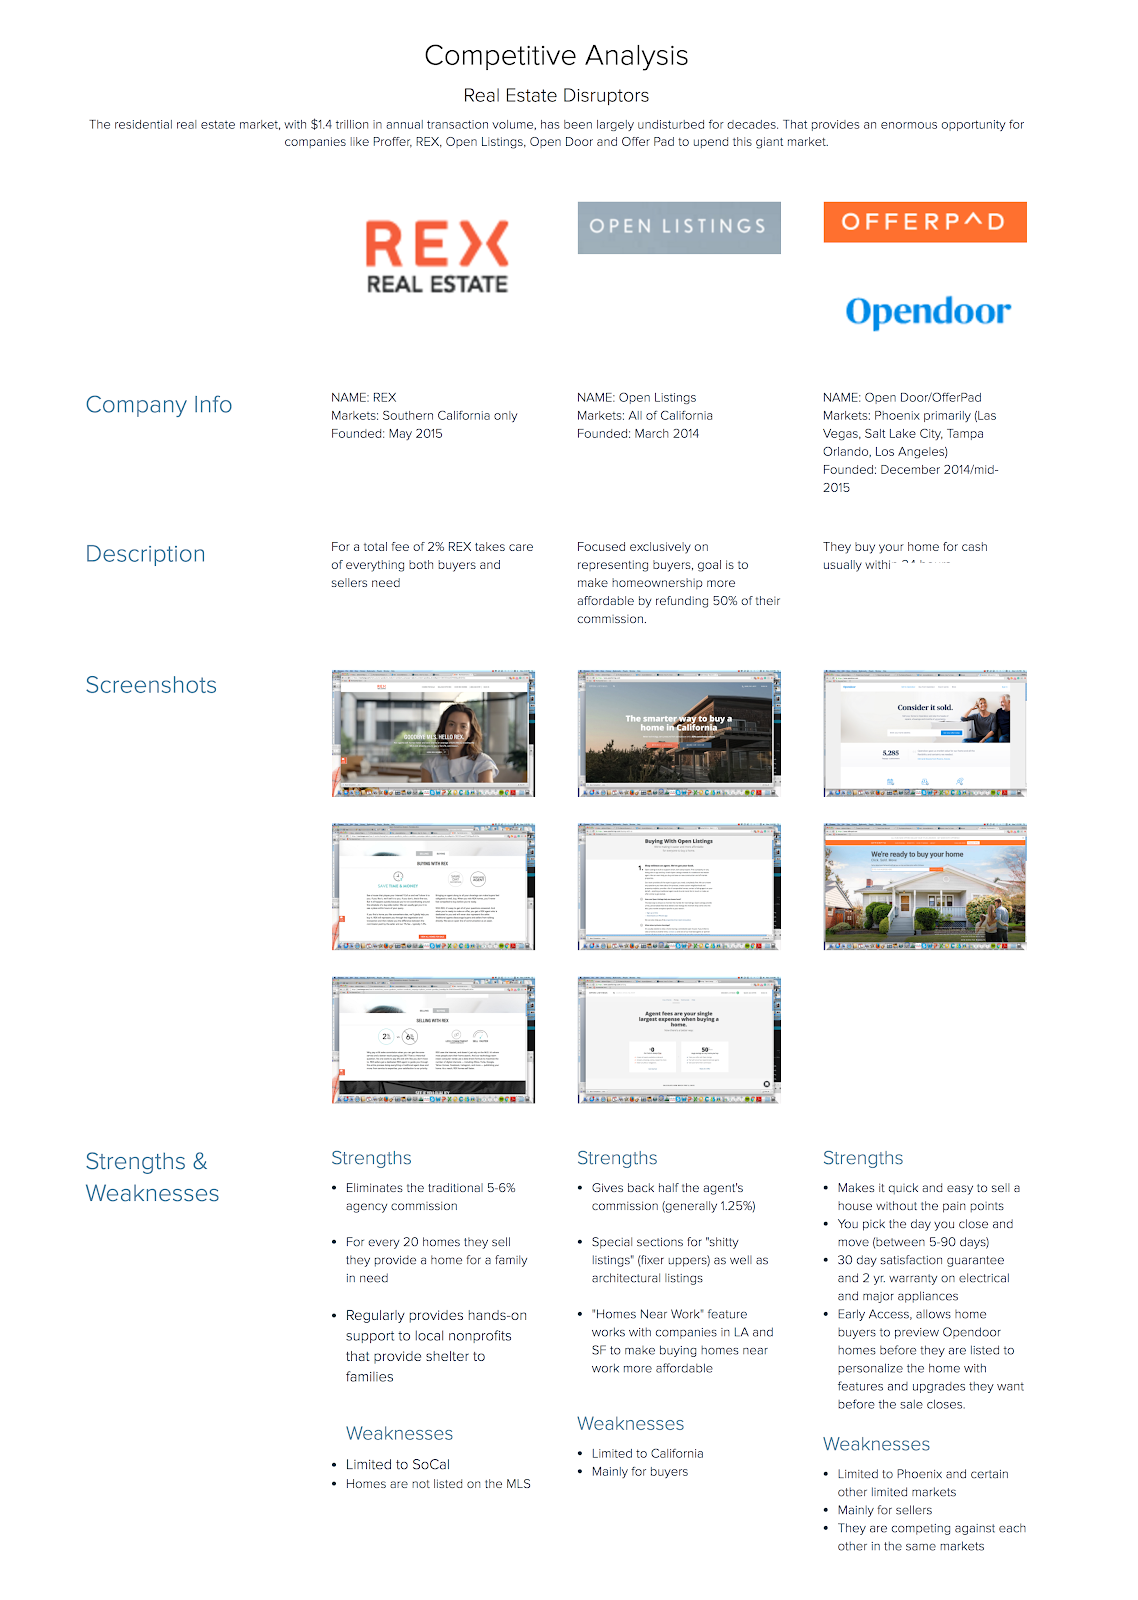 A competitive analysis for a real estate website is documented in Xtensio with visual and qualitative comparison metrics.